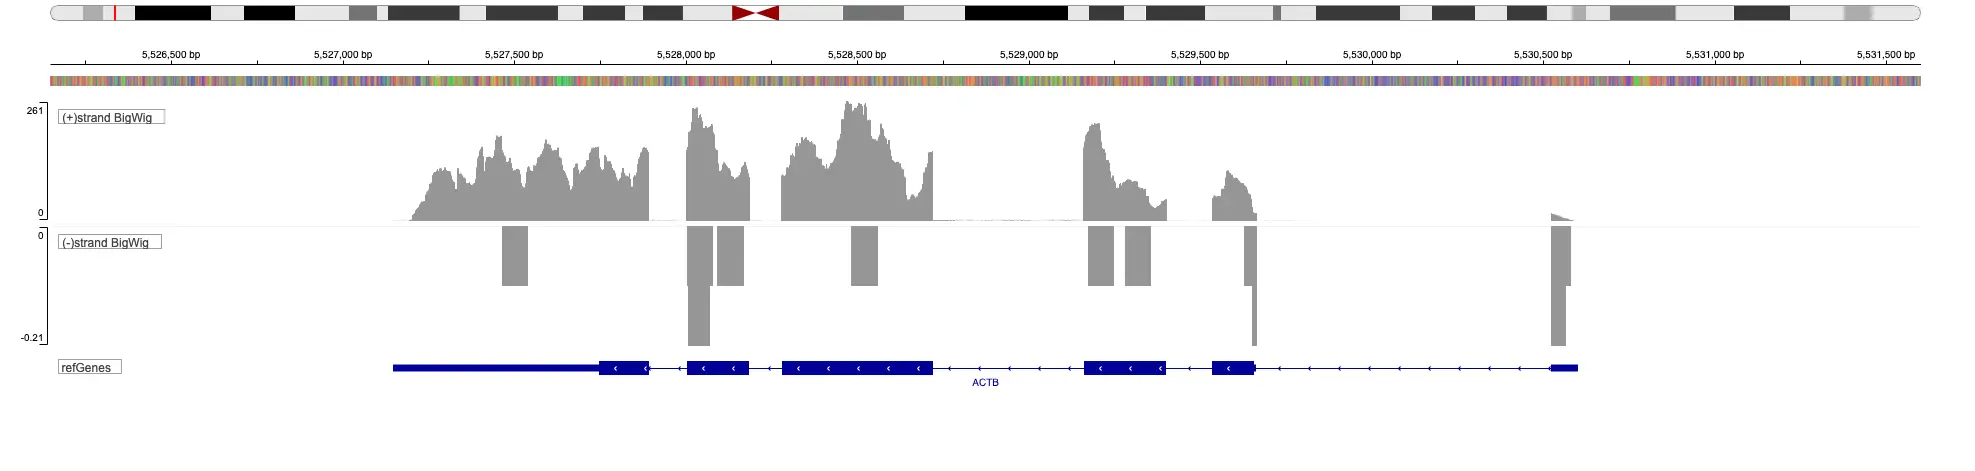 align reads to reference genome with Bismark bisulfite mapper which uses bowtie